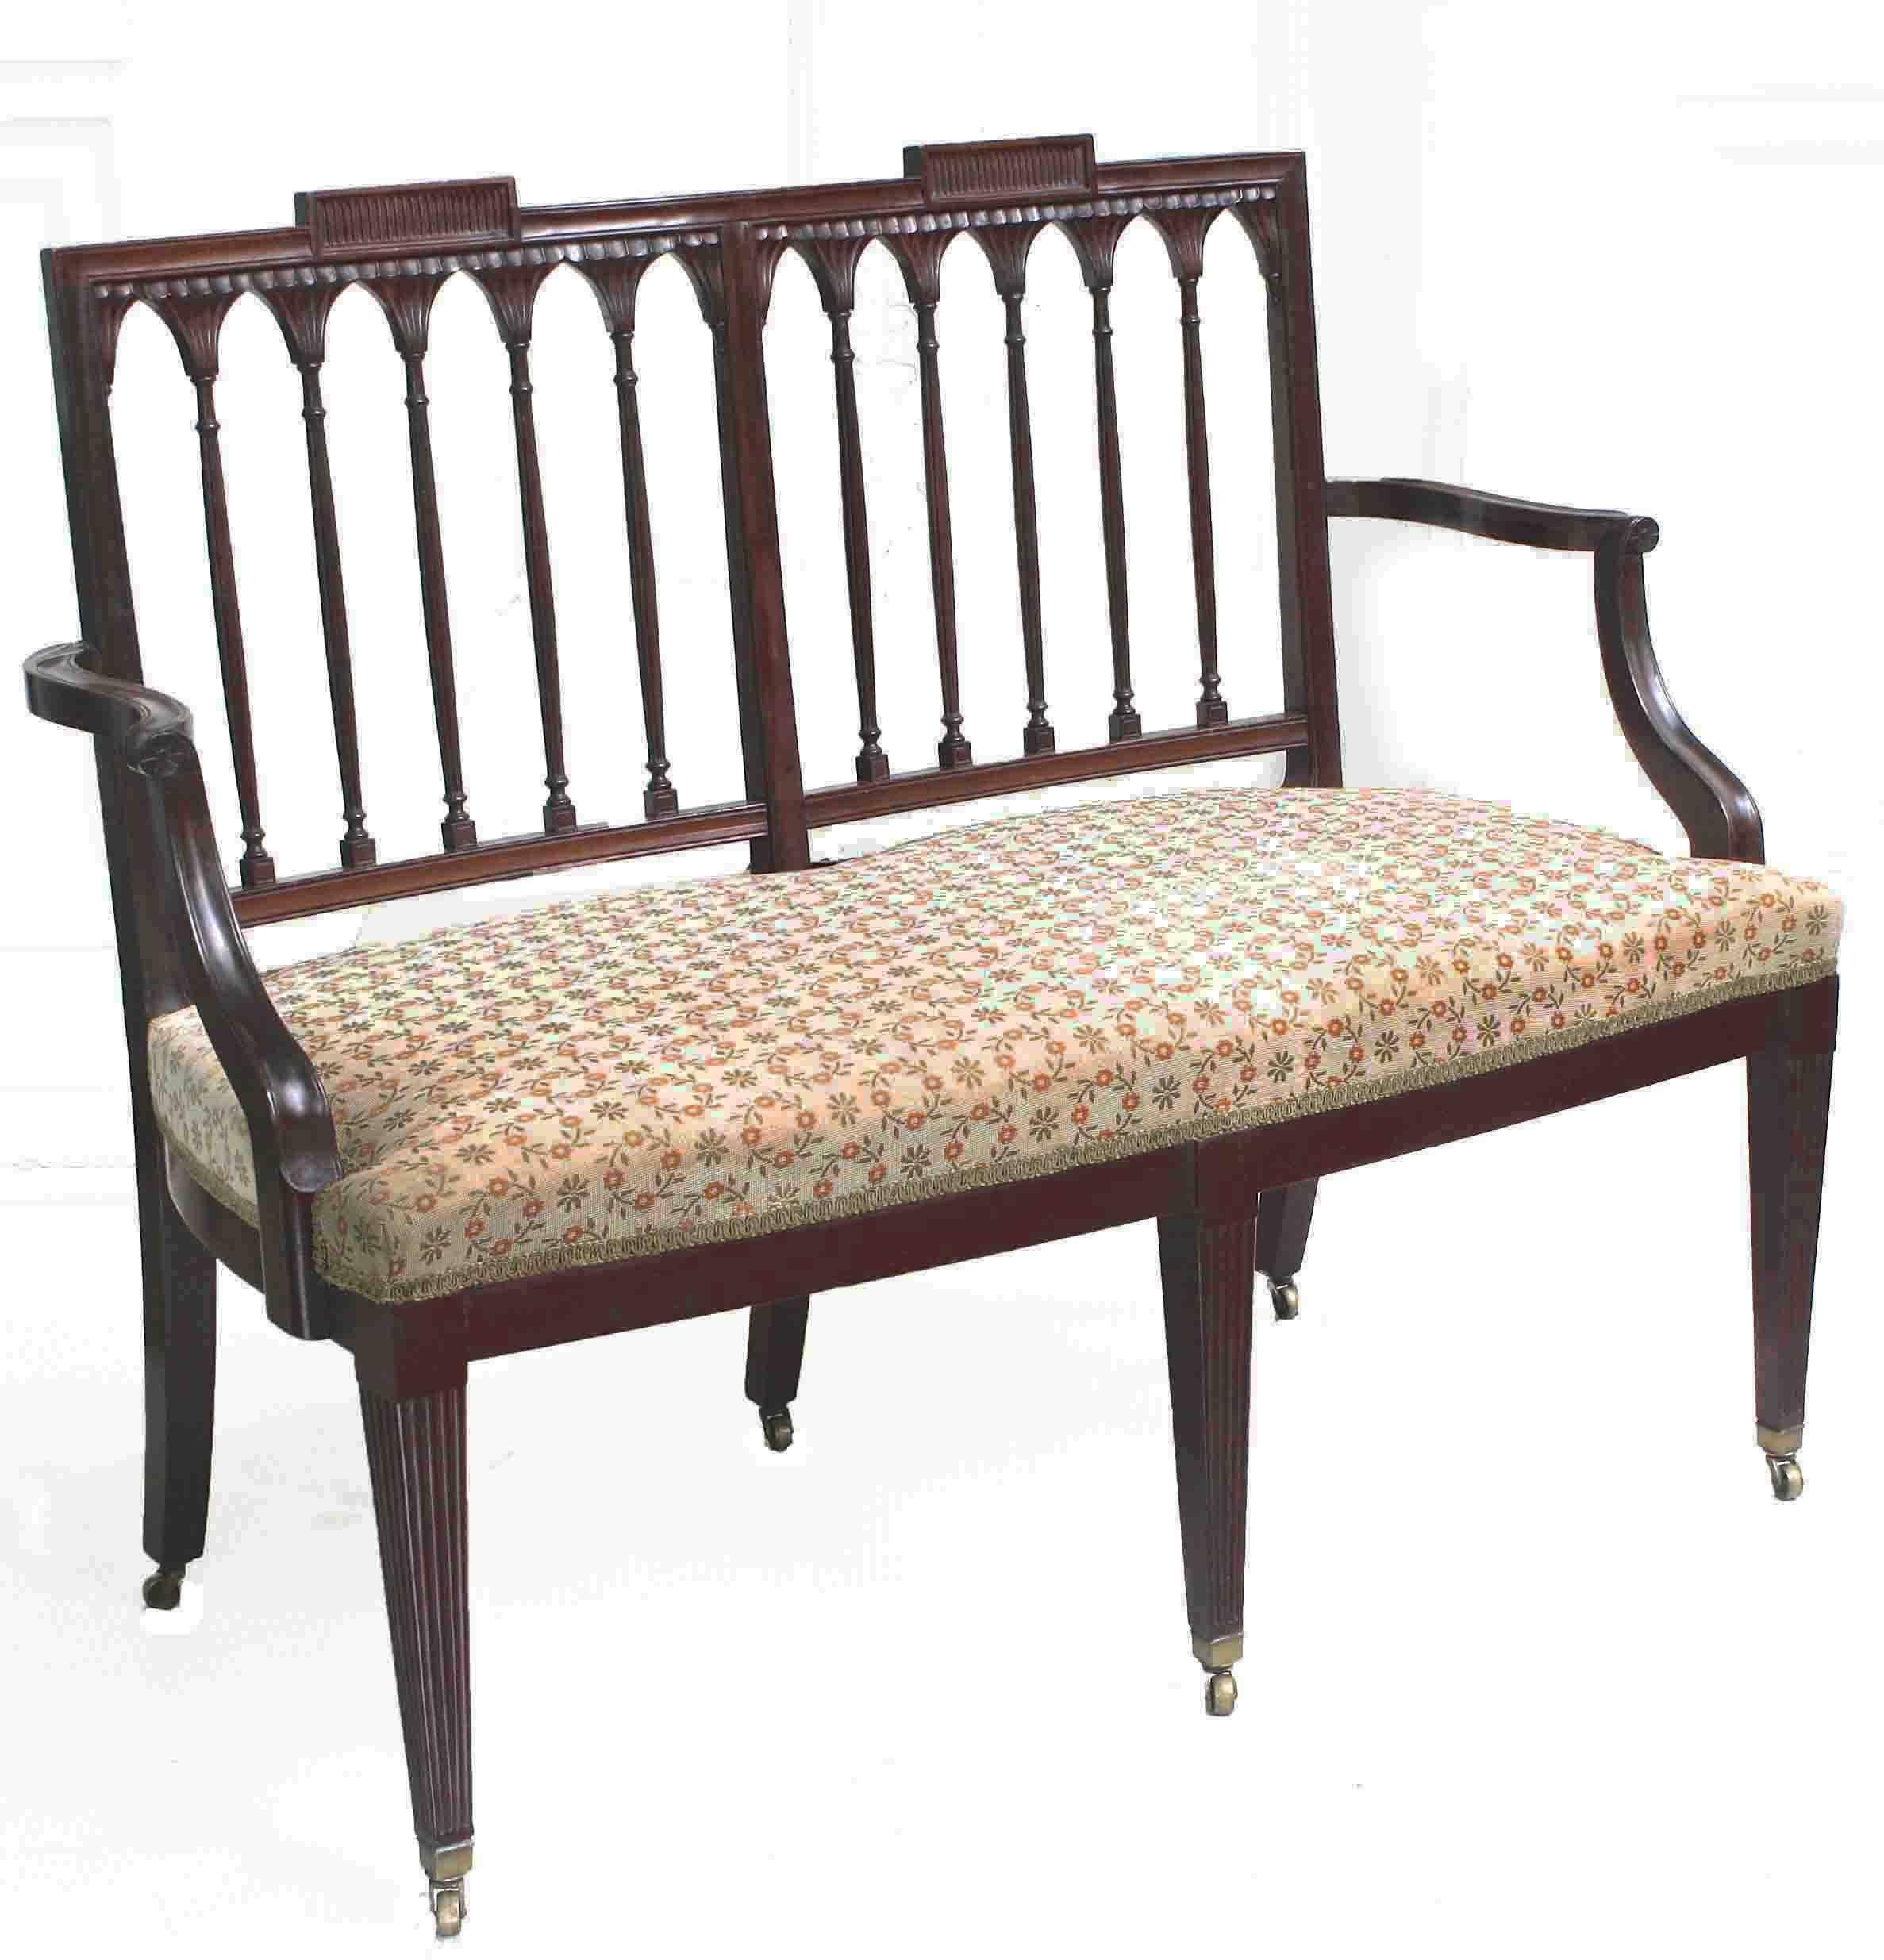 A solid mahogany framed two-seat box upholstered settee with exceptionally fine carved detail, reeded tapering front legs, and brass castered feet. Rhode Island origin and provenance. Ex: same private collection as the concurrently offered set of